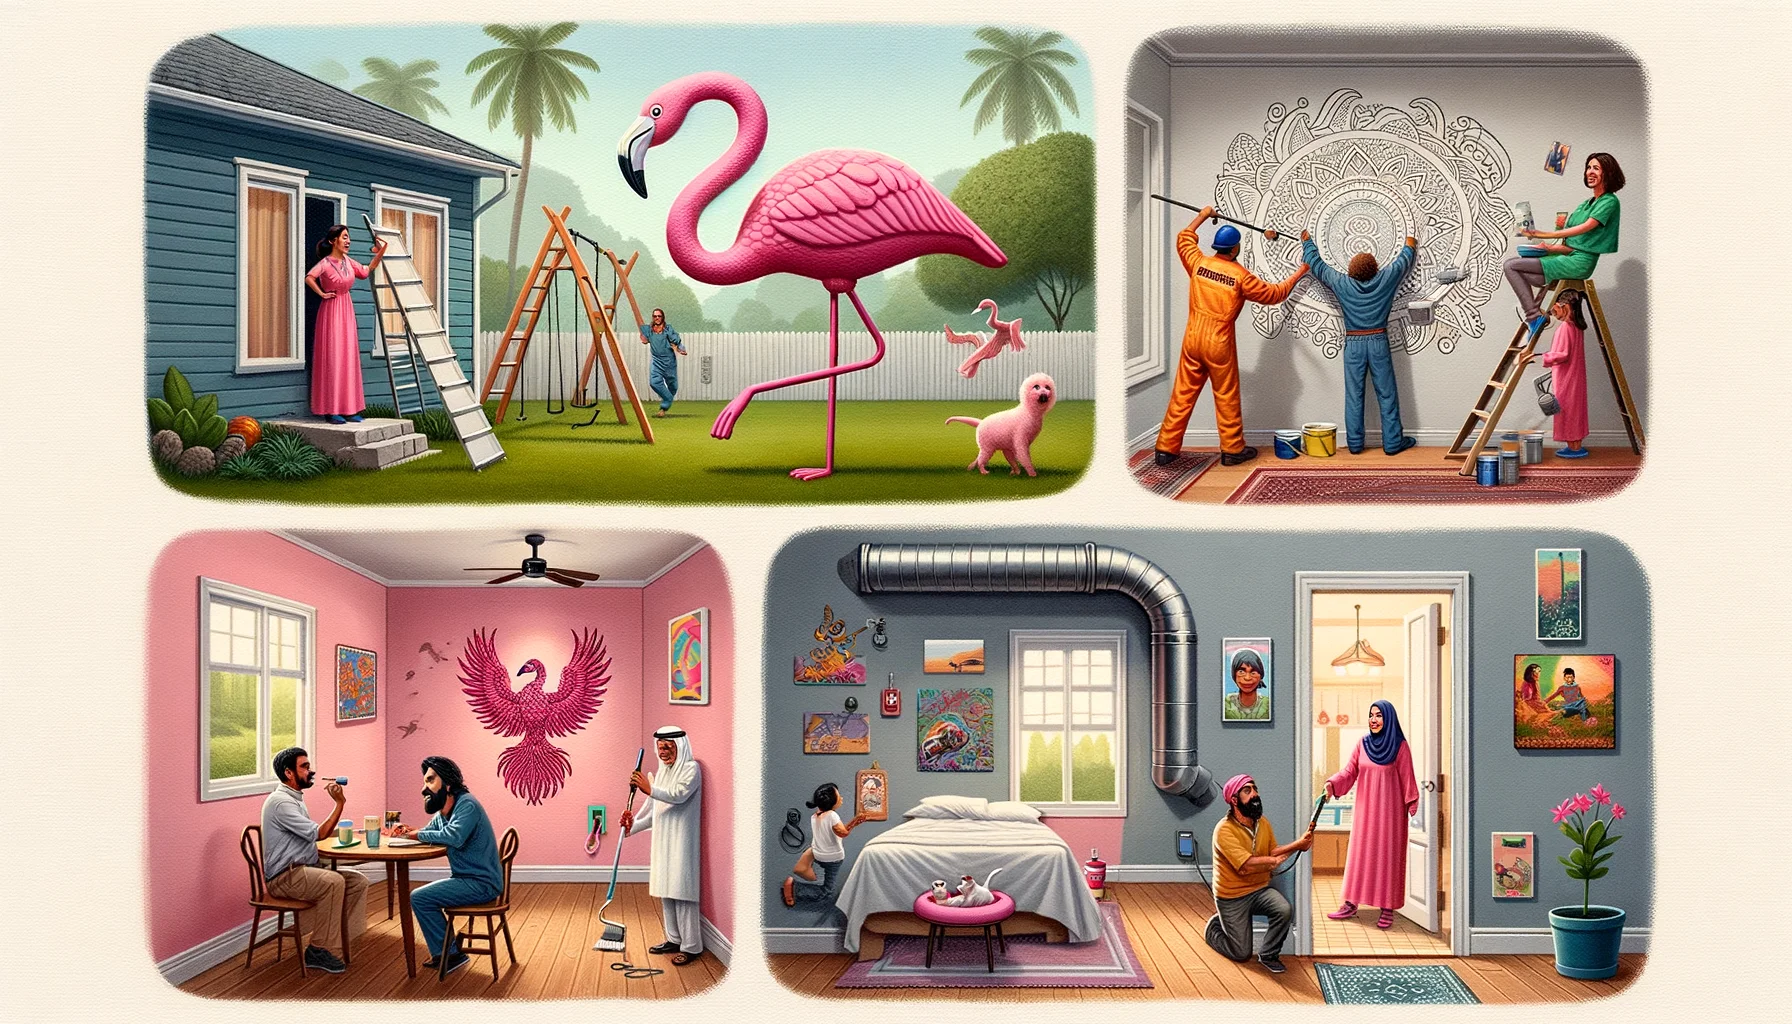 Create a humorous, realistically detailed image set in the theme of 'perfect' home improvements and renovations. Include lighthearted elements such as a pink flamingo lawn ornament appearing to assist a South Asian man paint an exterior wall, an indoor jungle gym in the living room for maximum fun, a Middle-Eastern woman creating an artistic mural on a kitchen wall, and a direct chute from the bedroom to the kitchen for those emergency snack times. Add elements that showcase the height of optimism for home renovations.